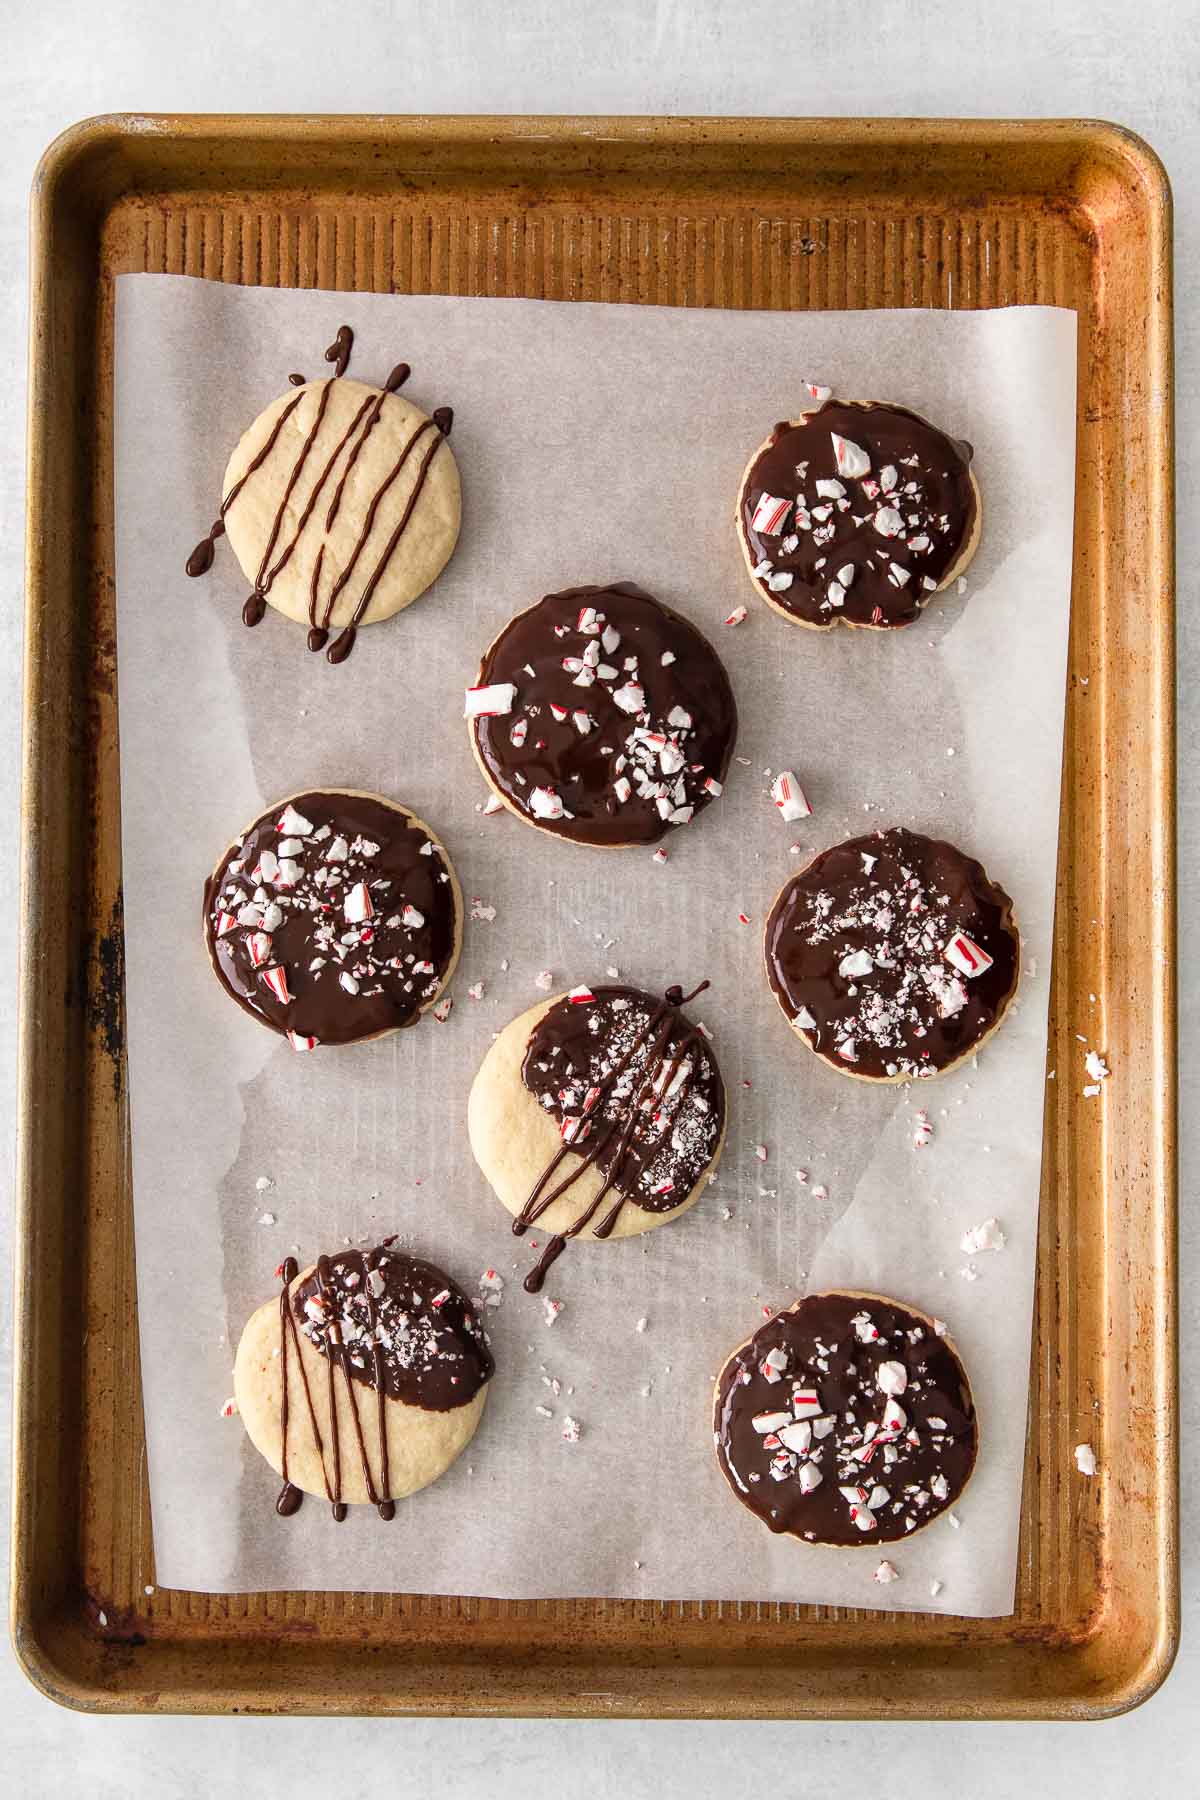 eight shortbread cookies dipped in chocolate and topped with crushed peppermint candy on a baking sheet.